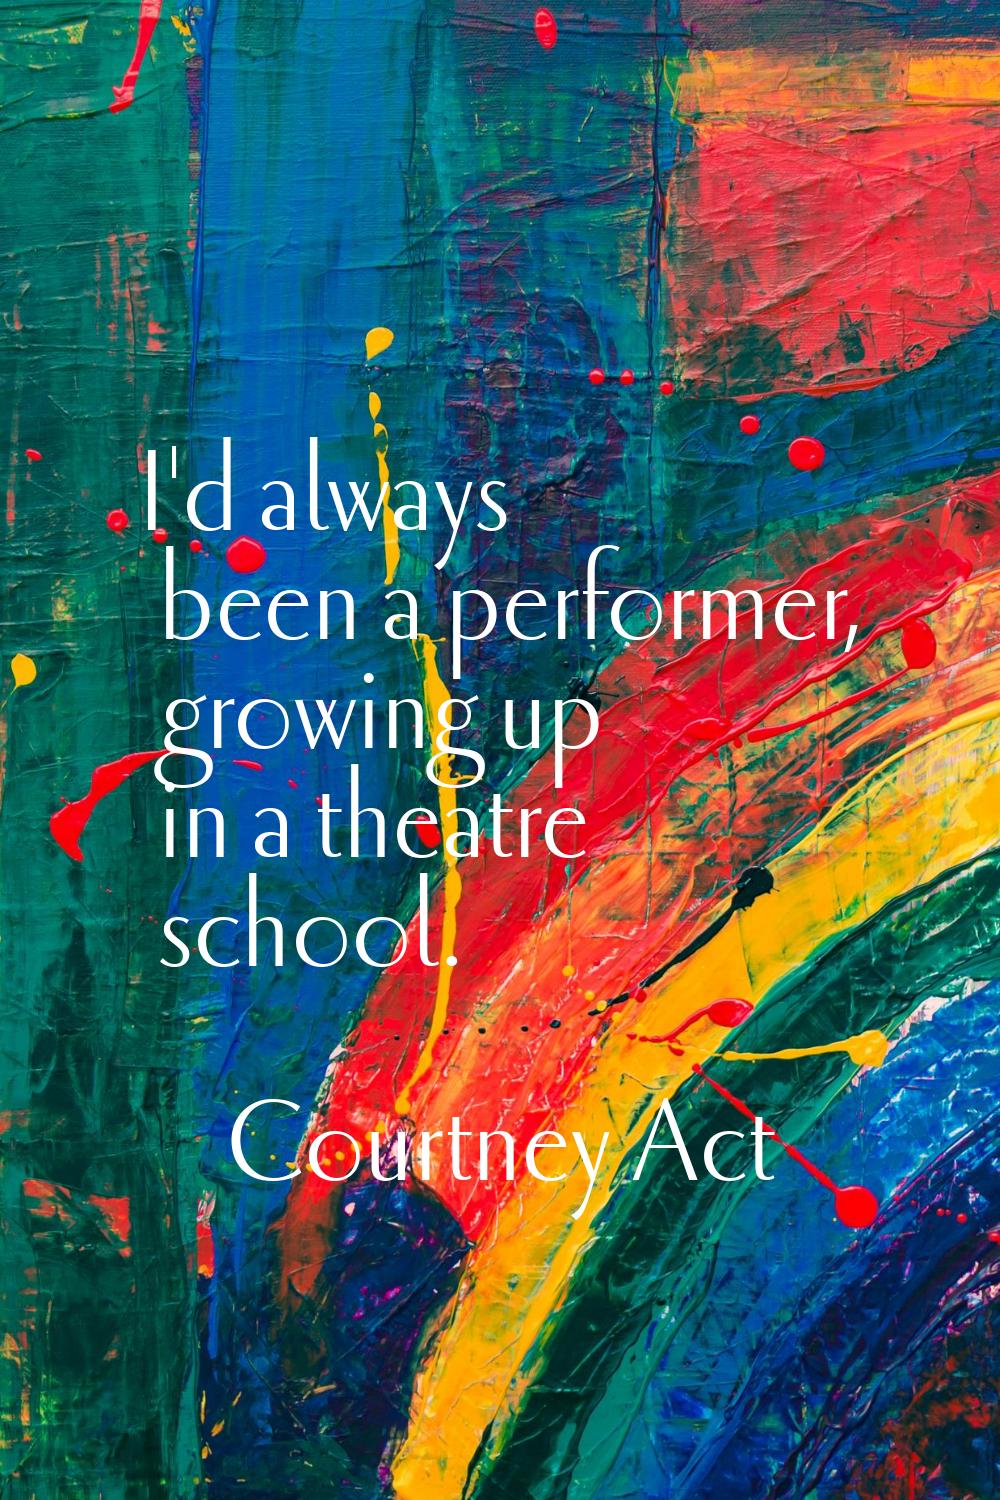 I'd always been a performer, growing up in a theatre school.